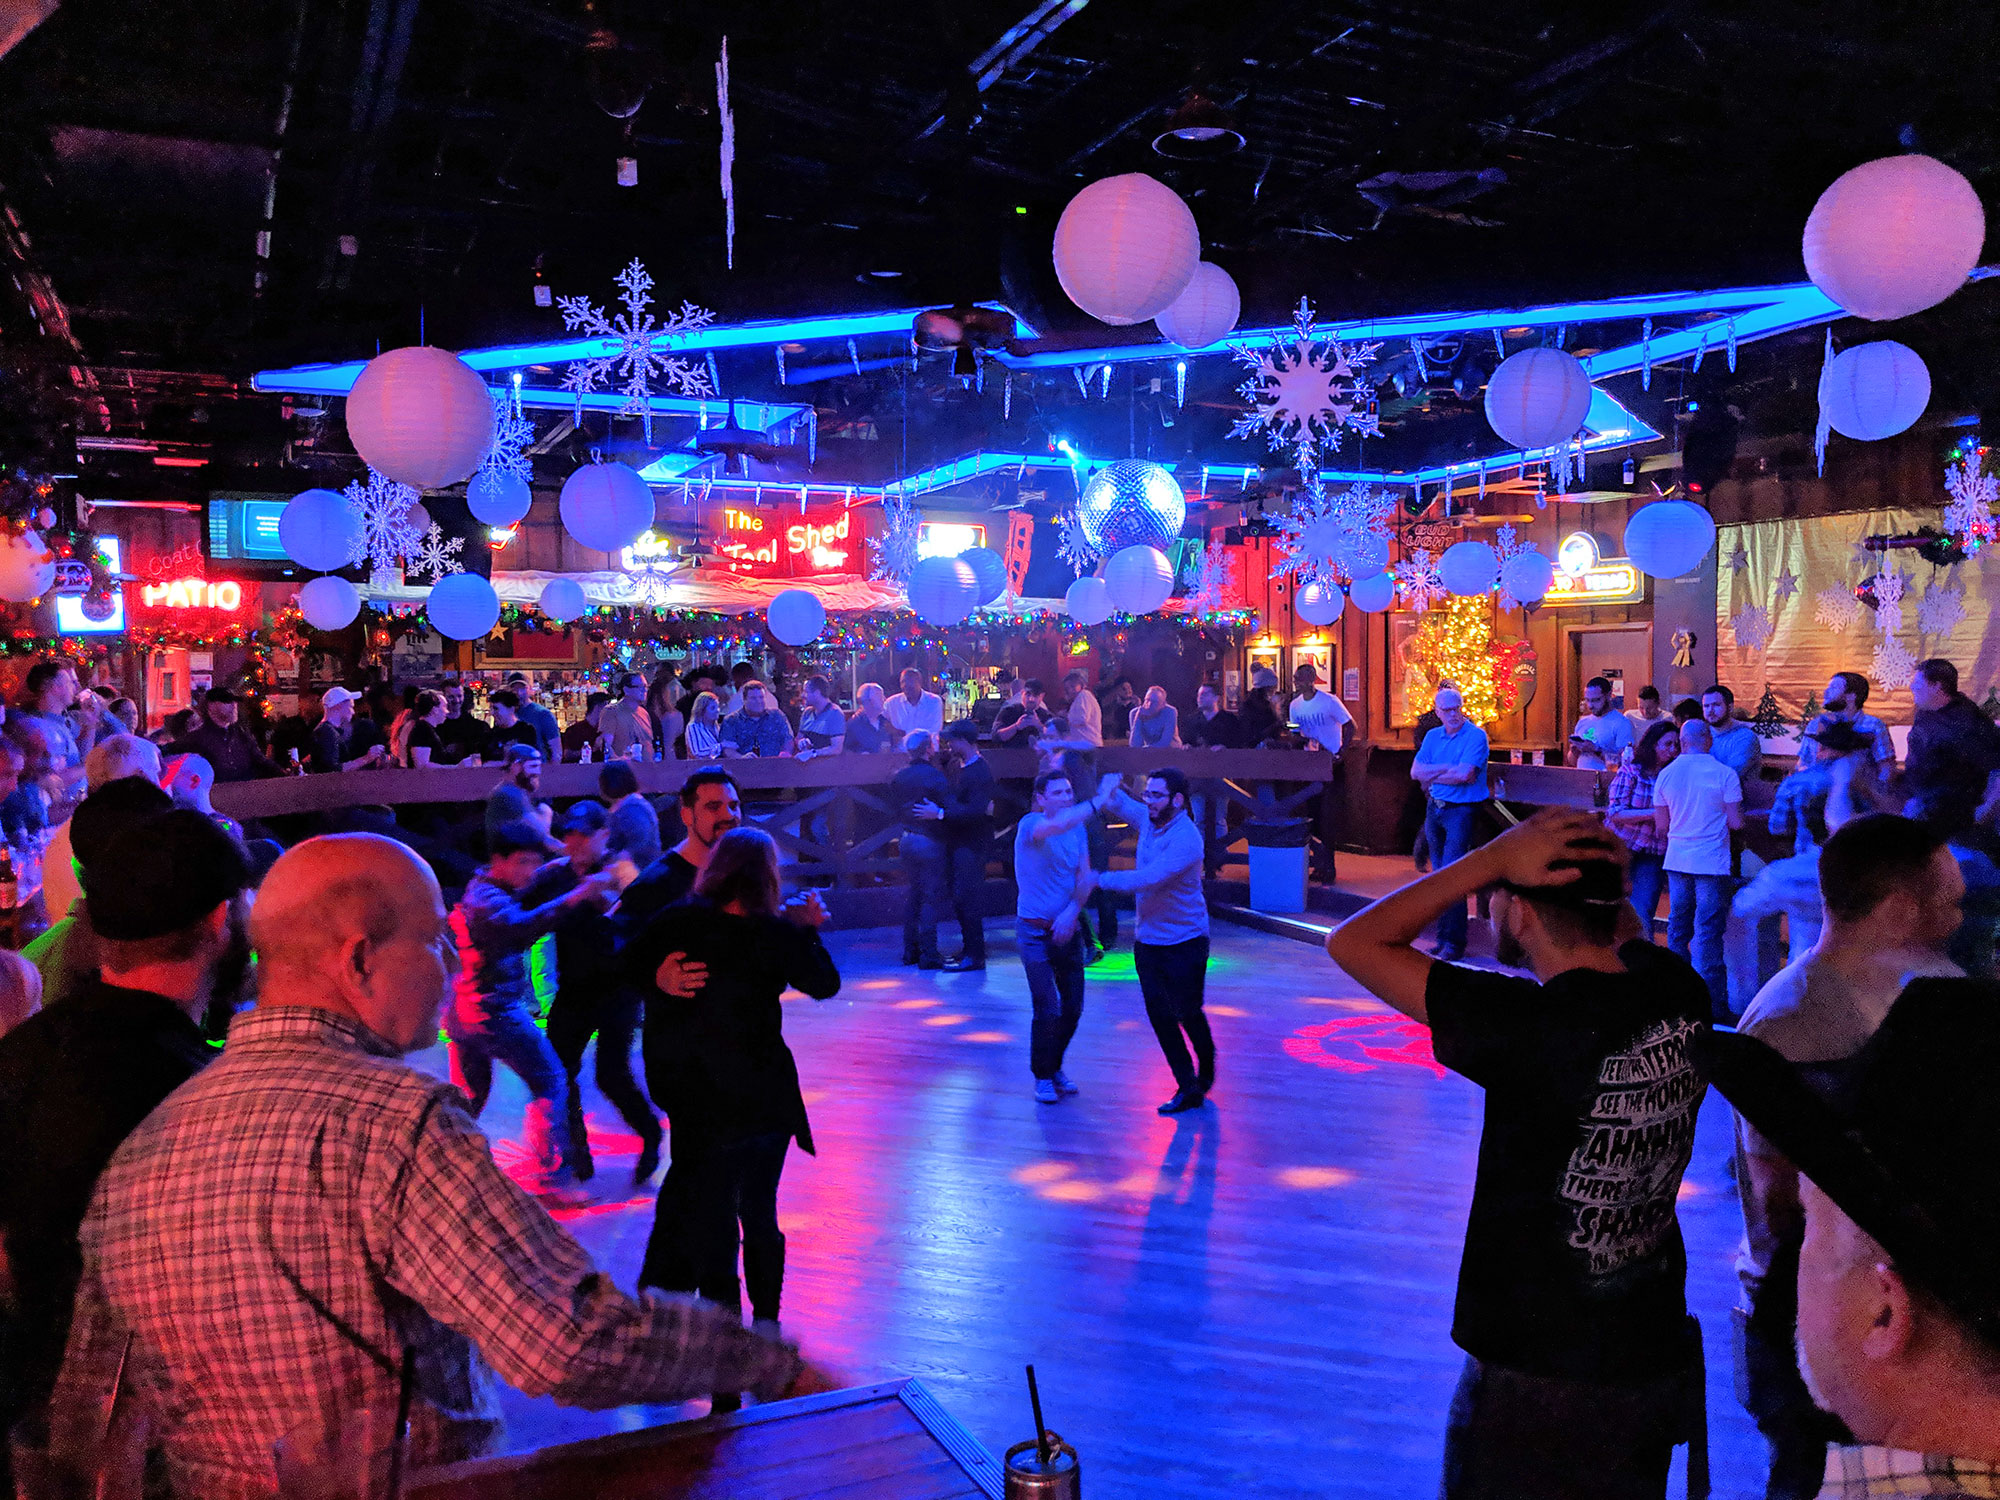 Country dancing at the Roundup Saloon in Oak Lawn, Dallas.